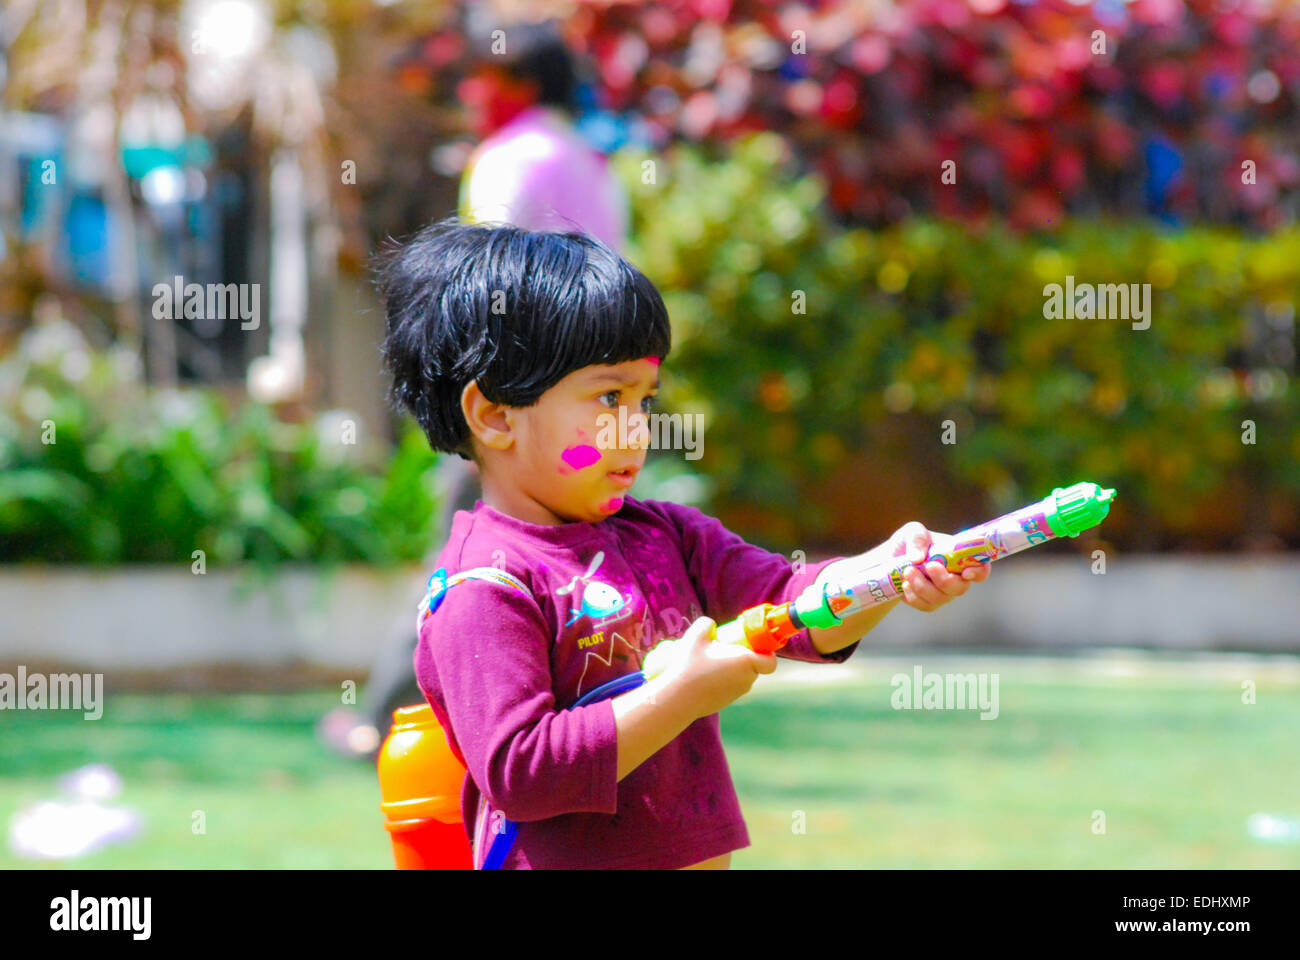 An Indian kid playing with powder colors & water during the spring hindu festival Holi also known as a festival of colors. Stock Photo